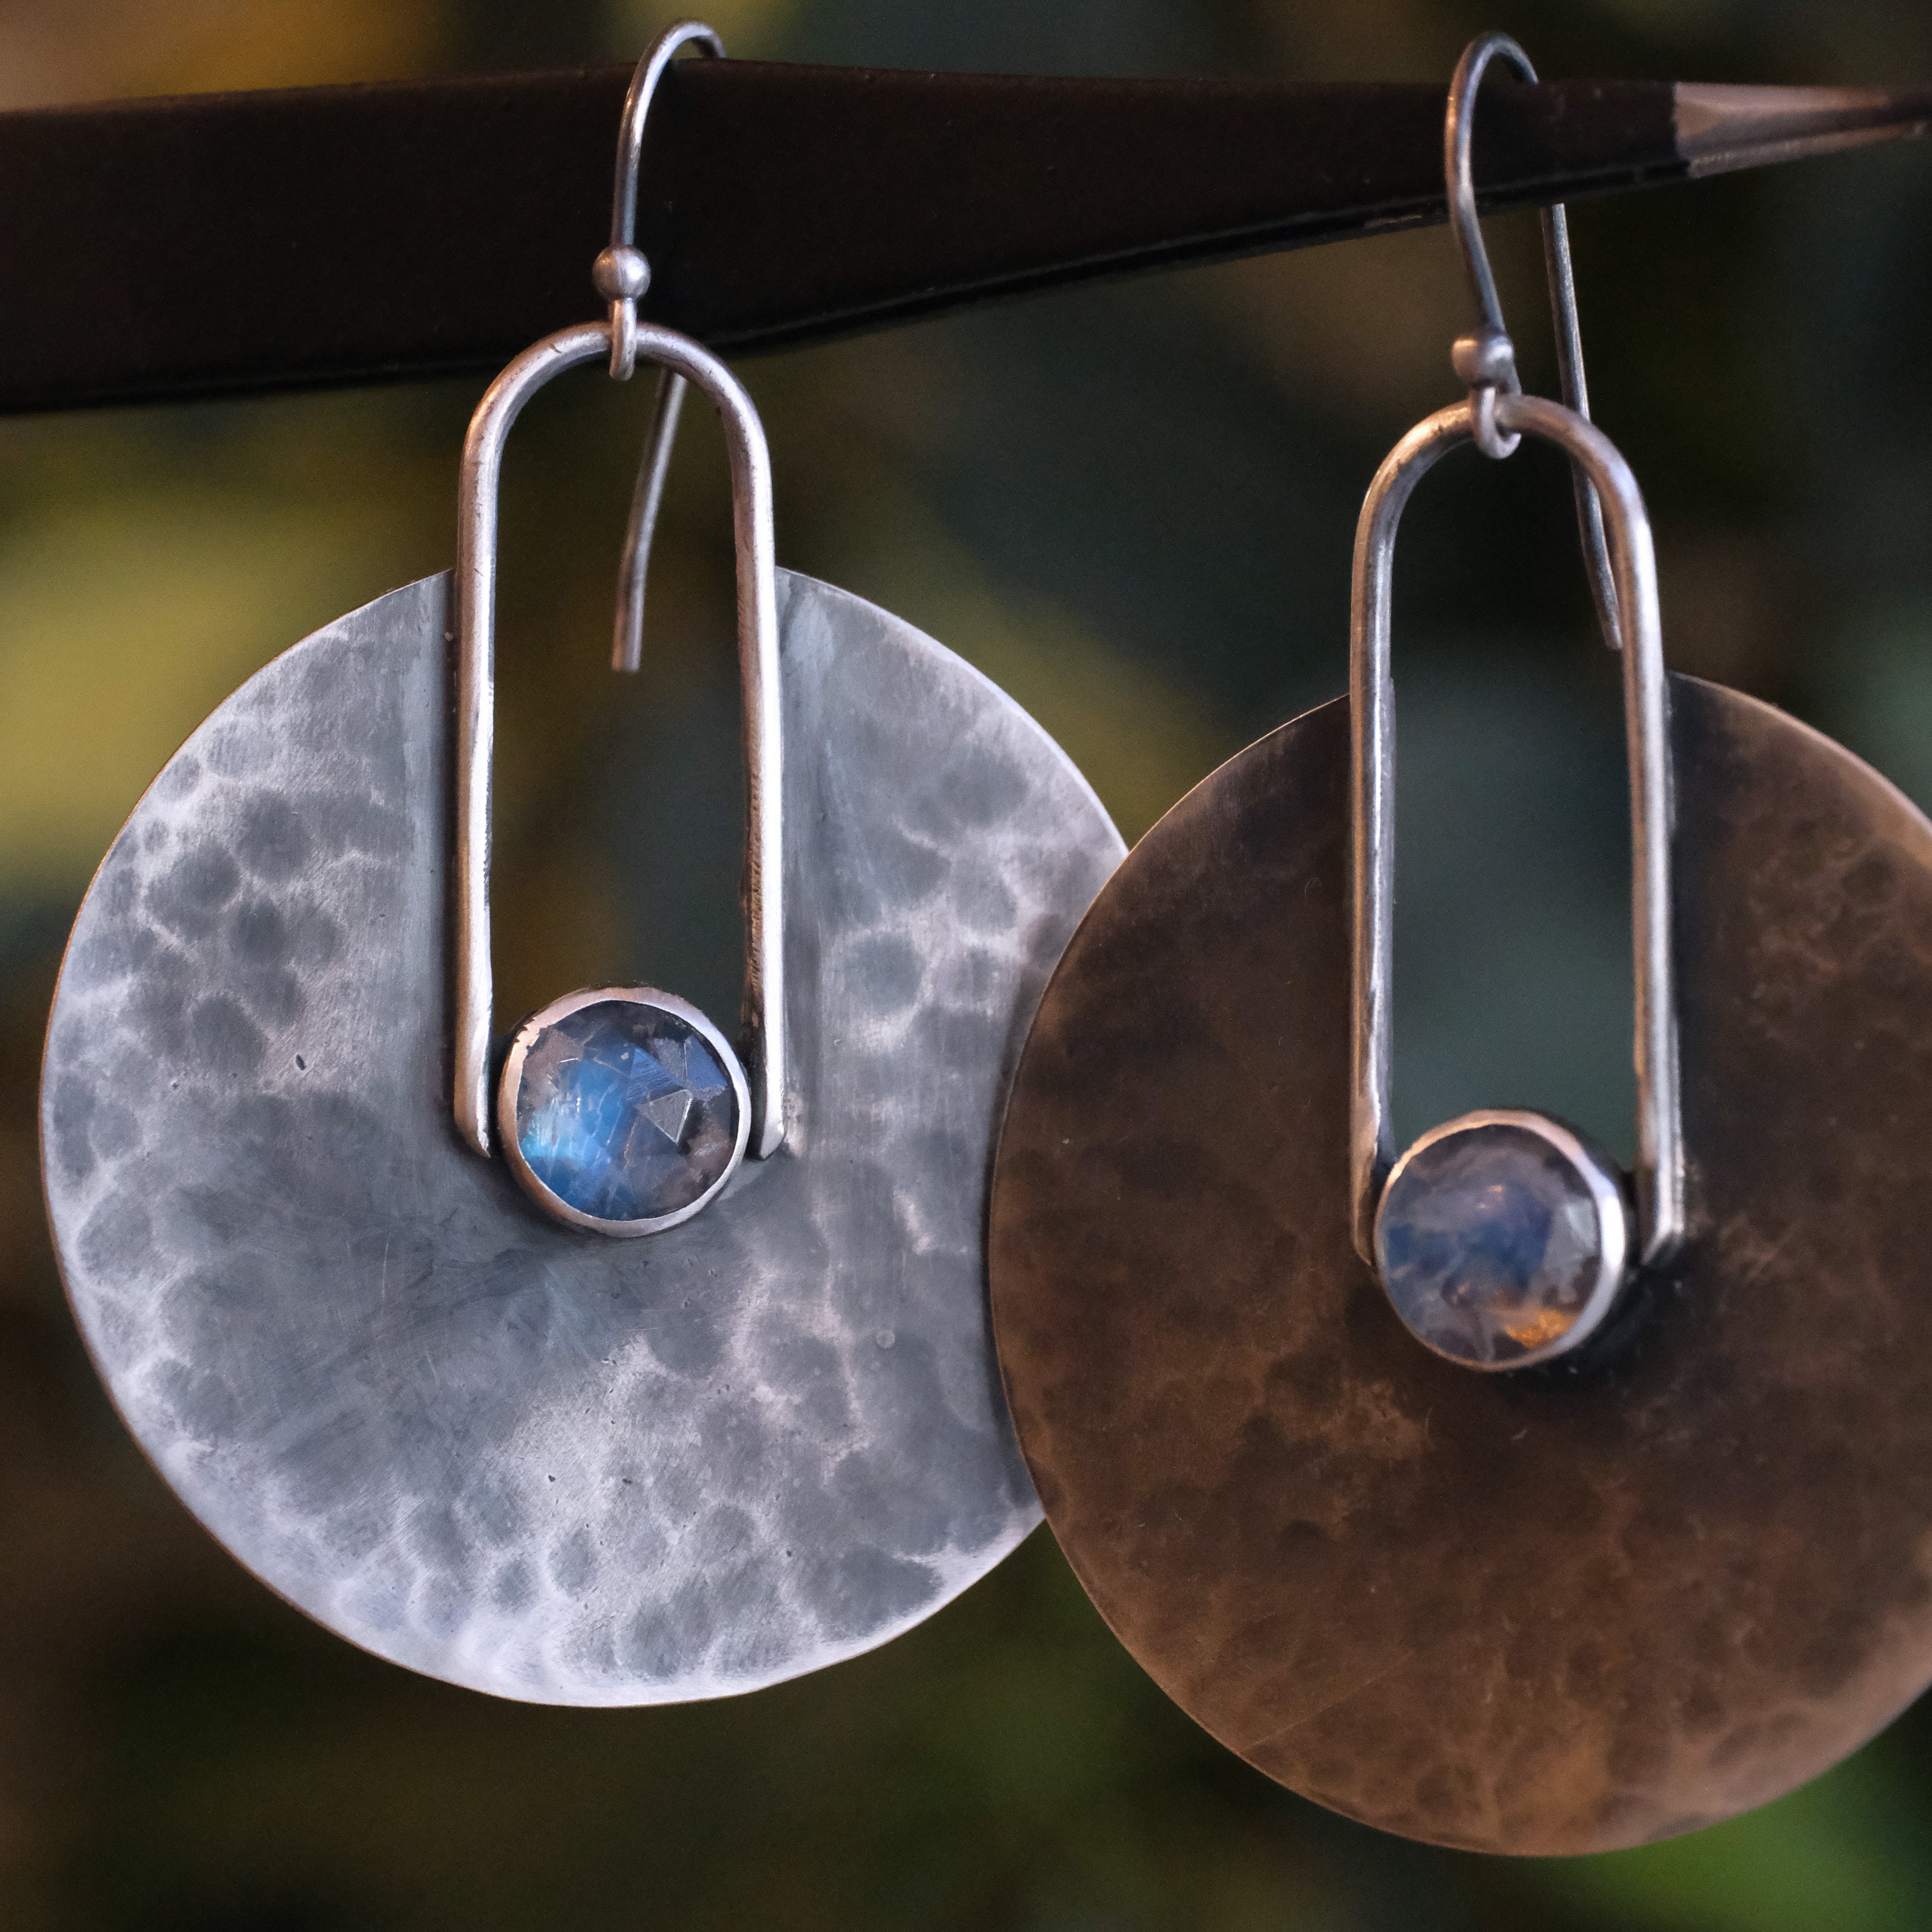 Moonstone + Sterling Relic Earrings - One of a Kind